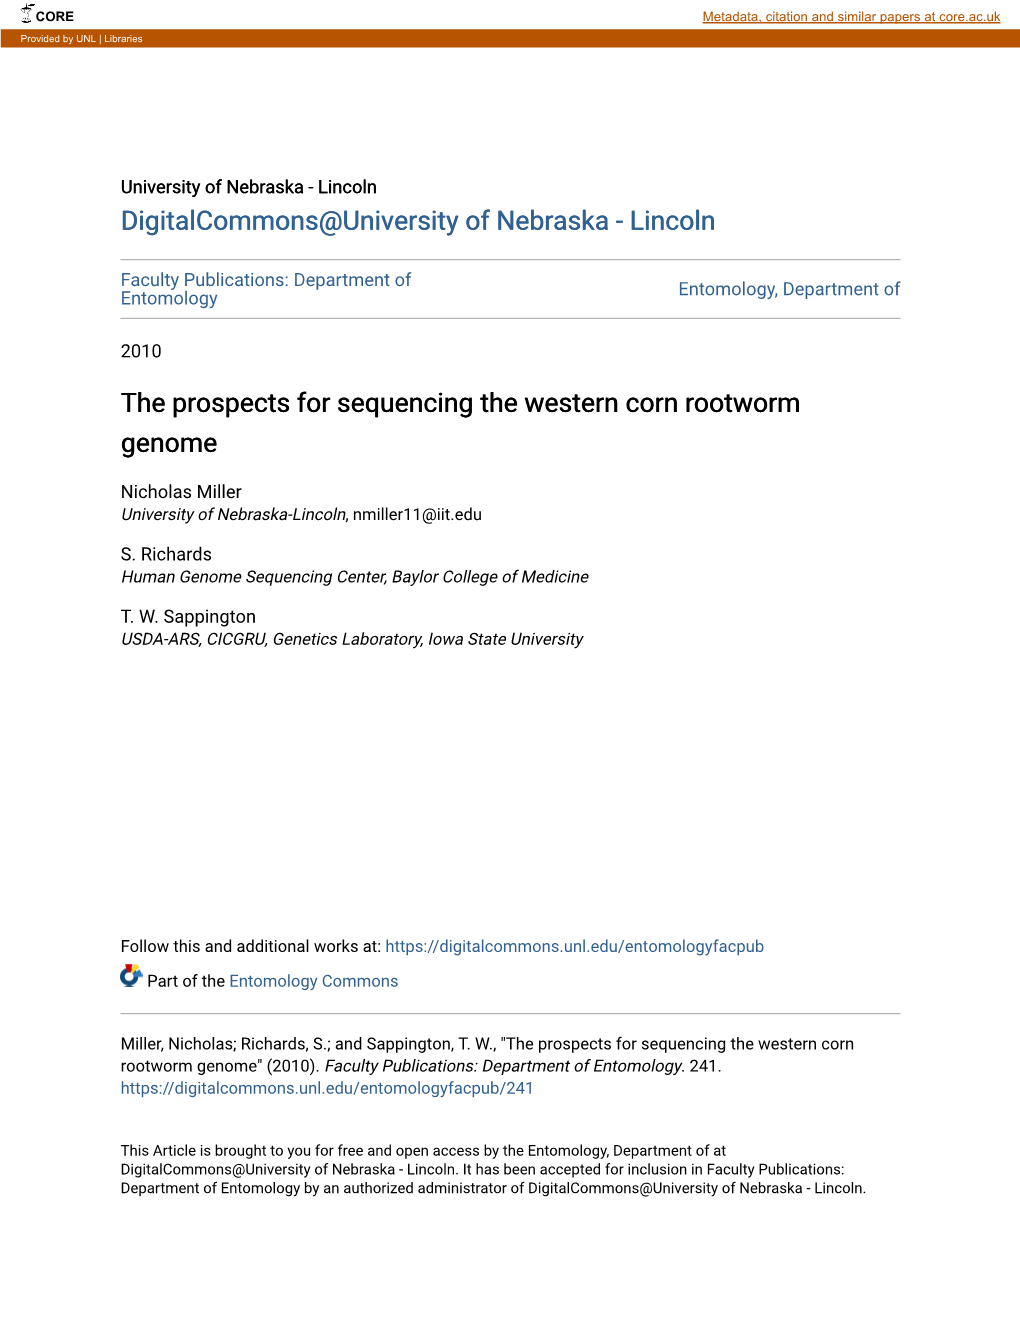 The Prospects for Sequencing the Western Corn Rootworm Genome